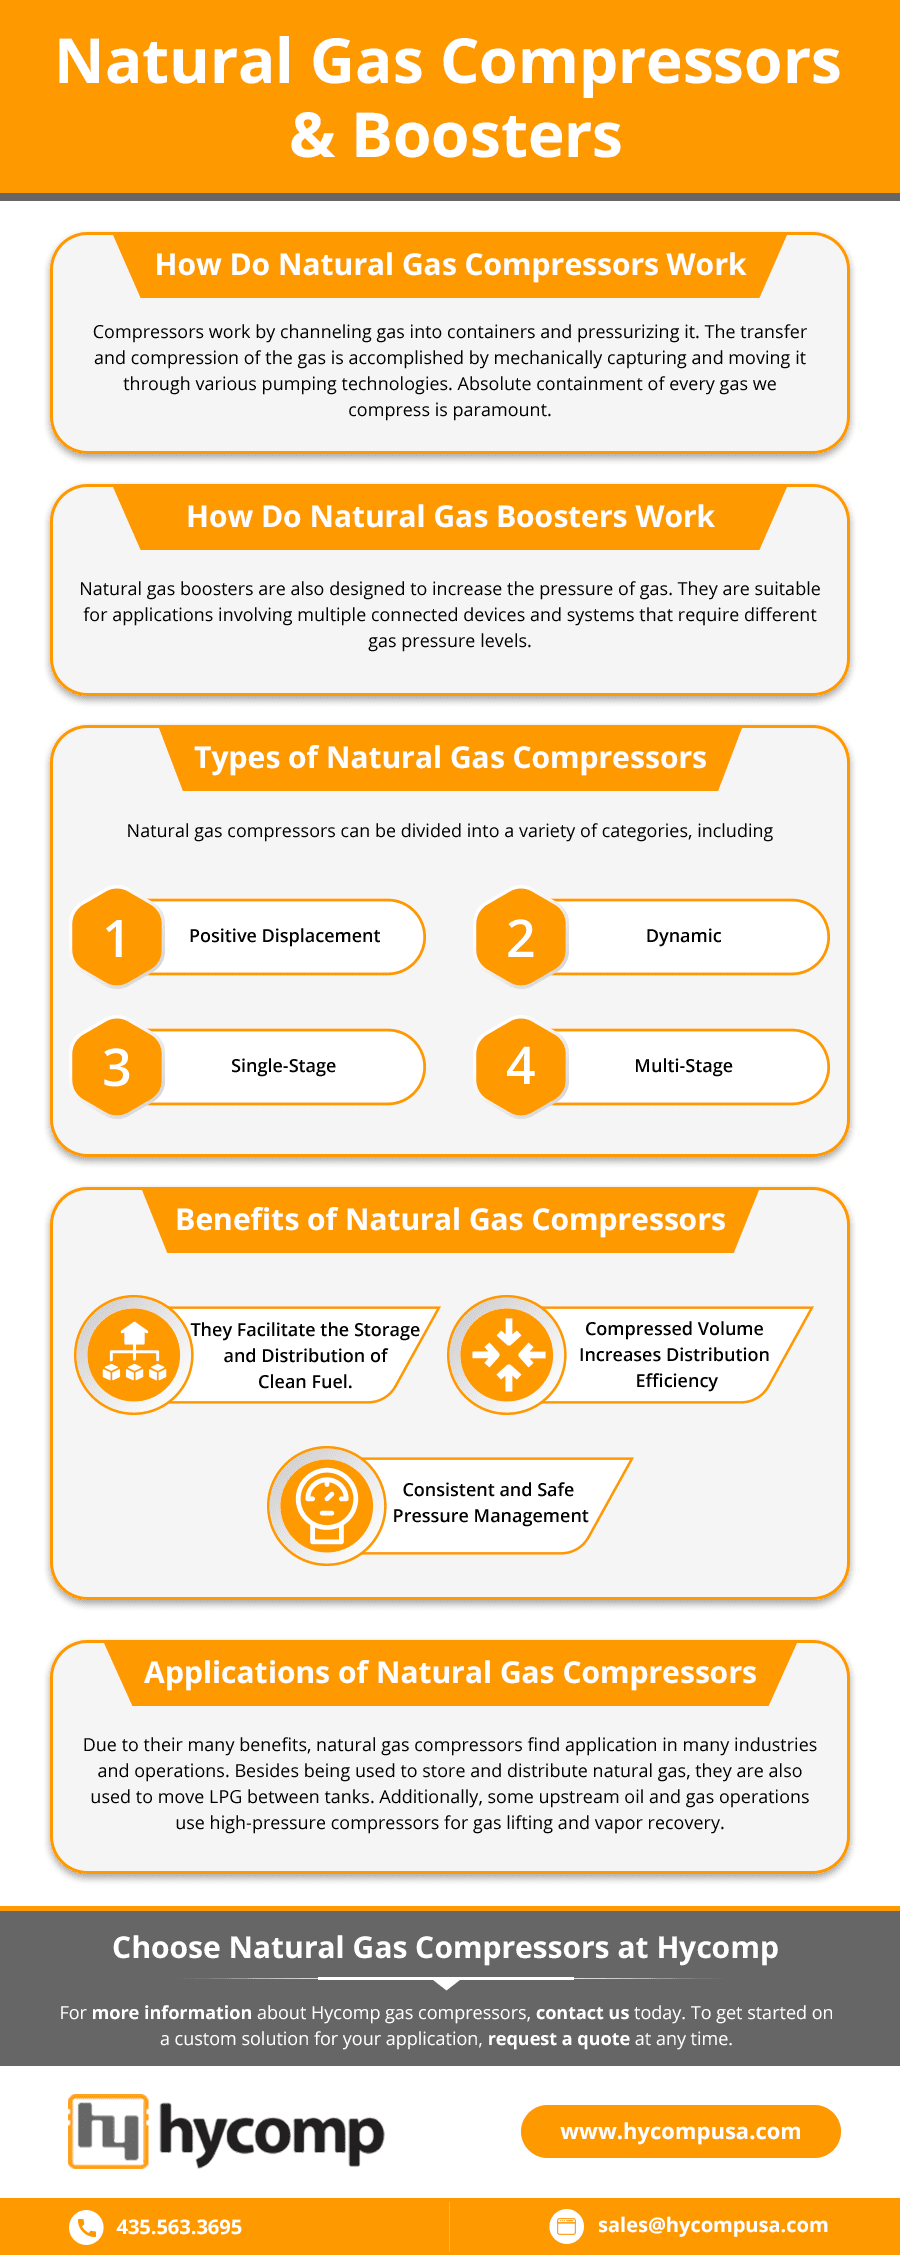 Natural Gas Compressors and Boosters